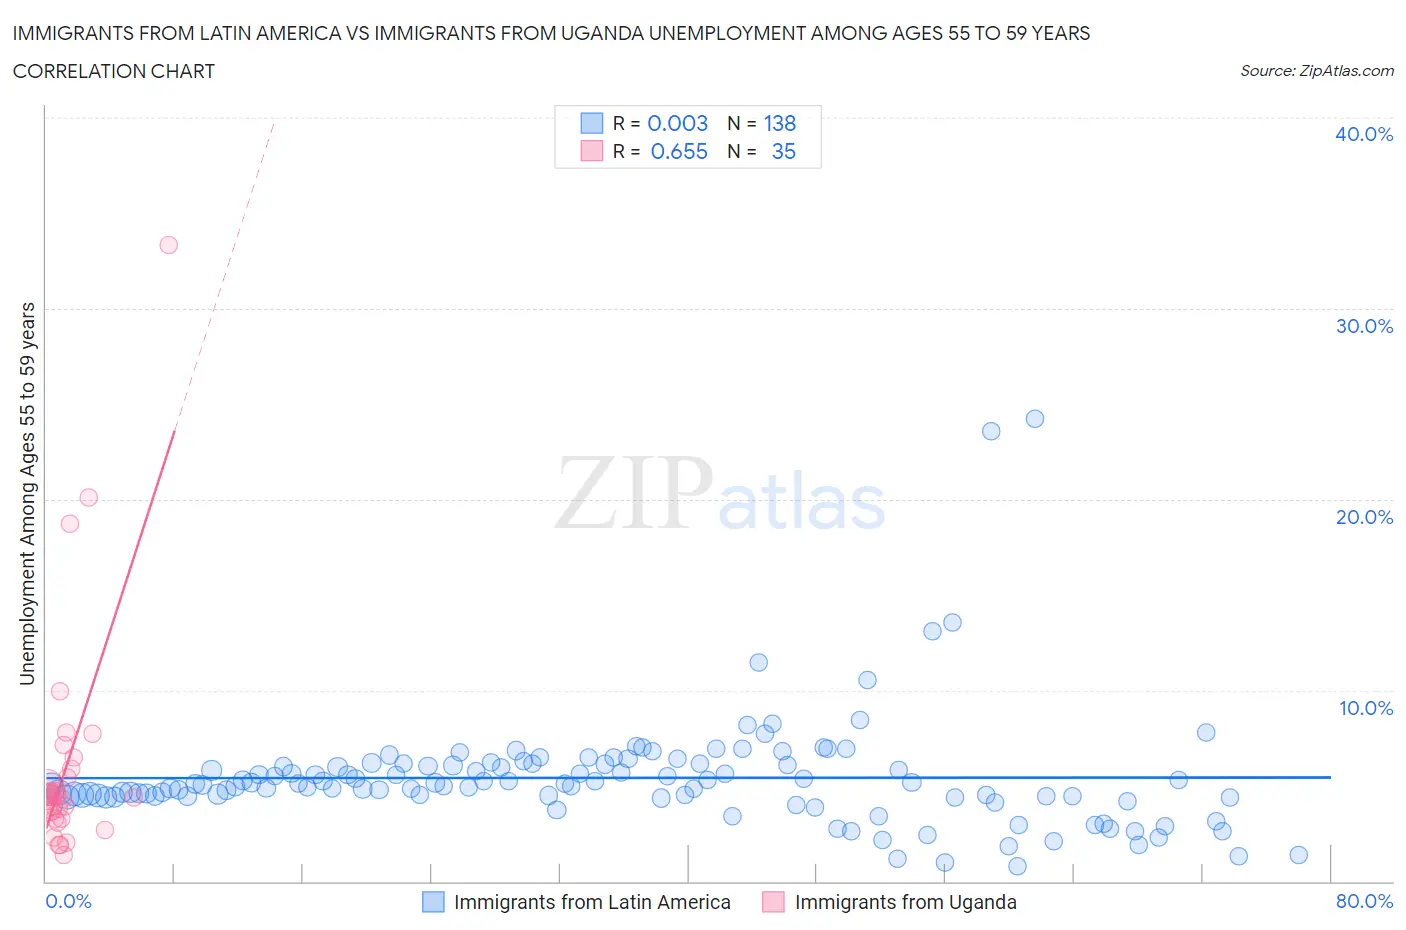 Immigrants from Latin America vs Immigrants from Uganda Unemployment Among Ages 55 to 59 years